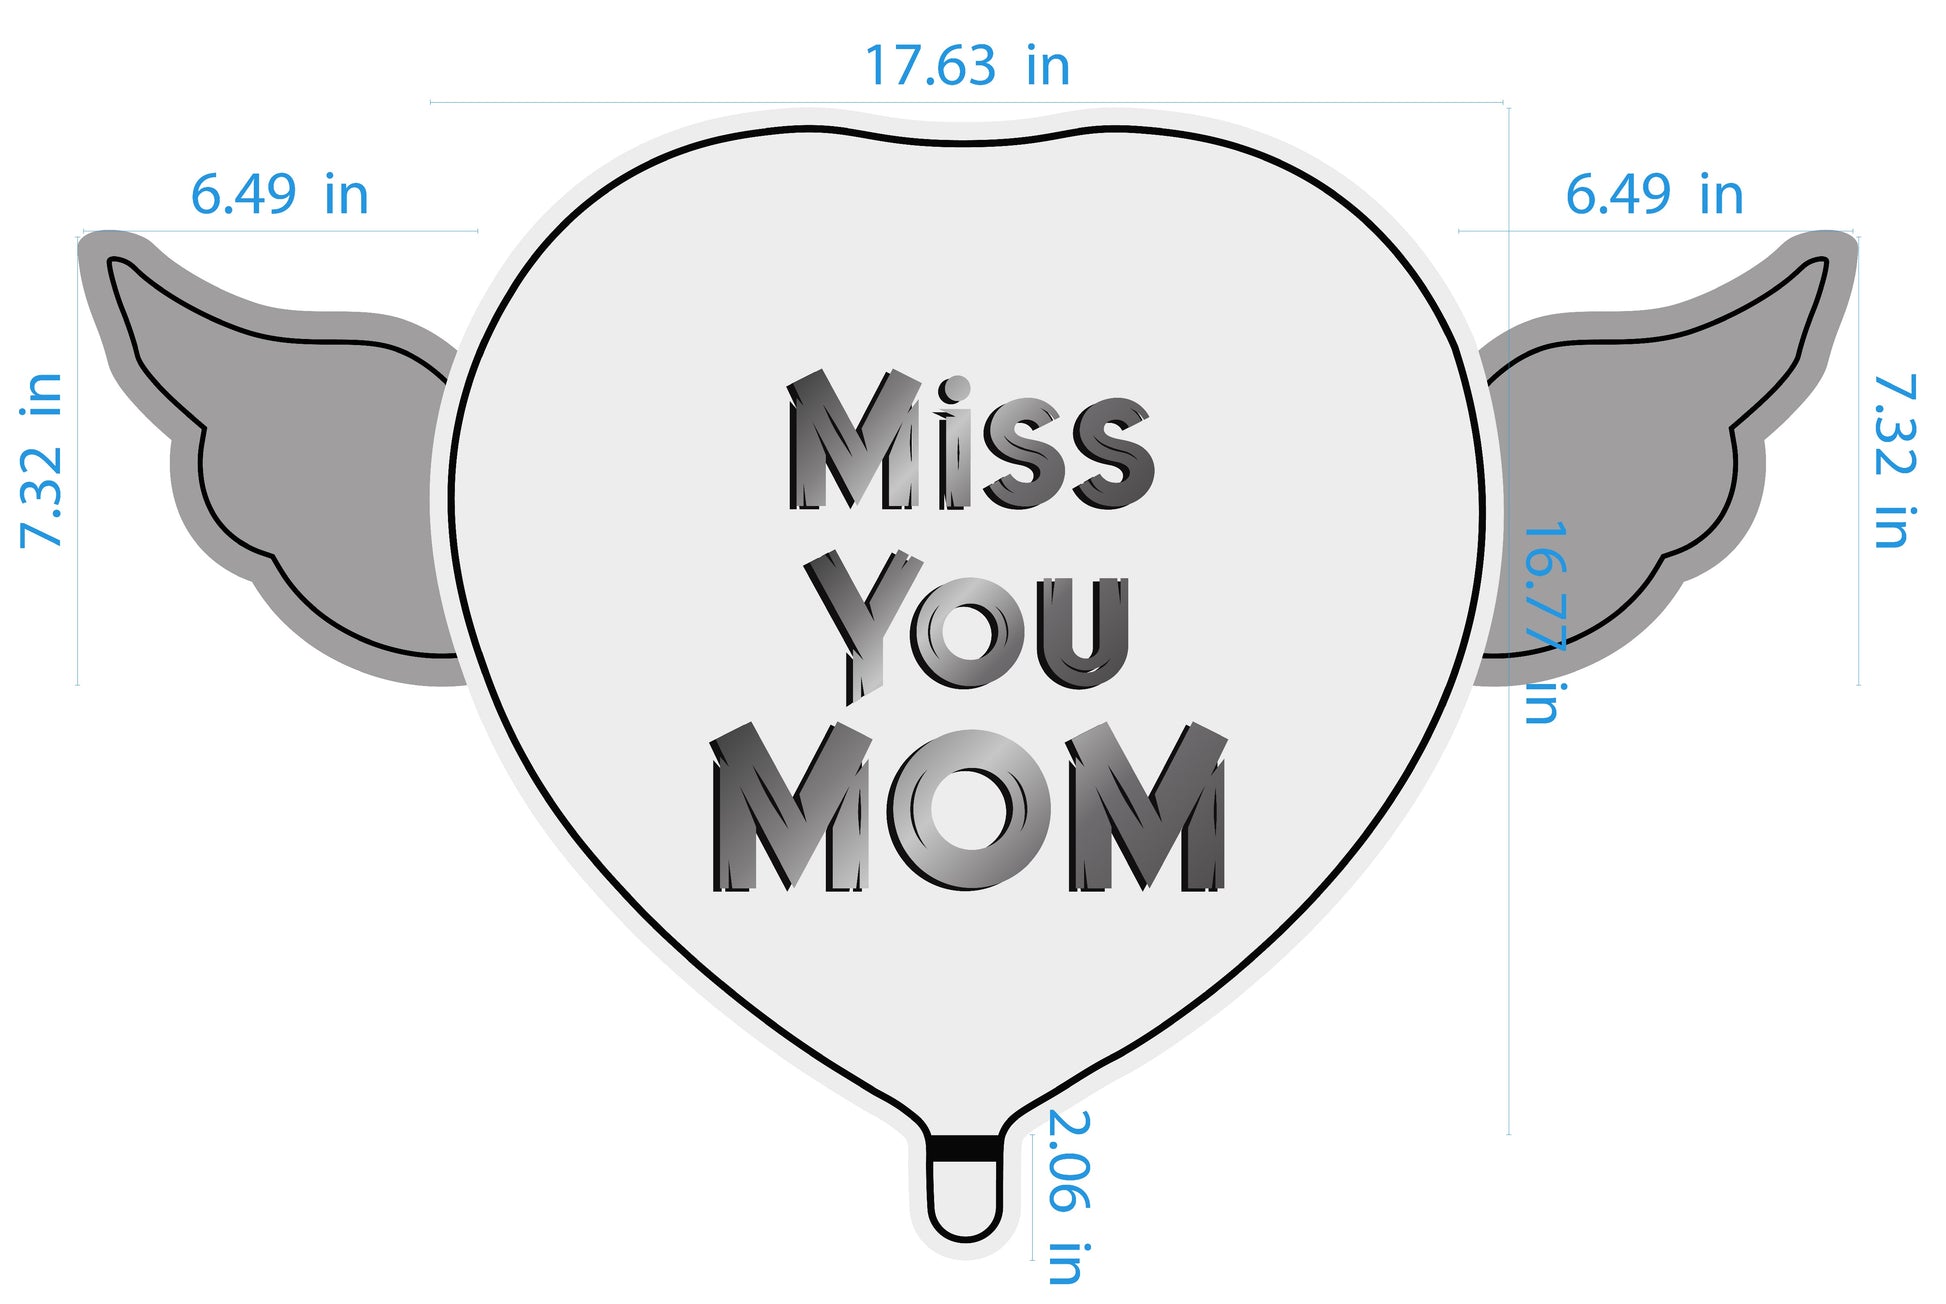 Miss You Mom Heavenly Balloons Heart Shaped with angel wings dimensions